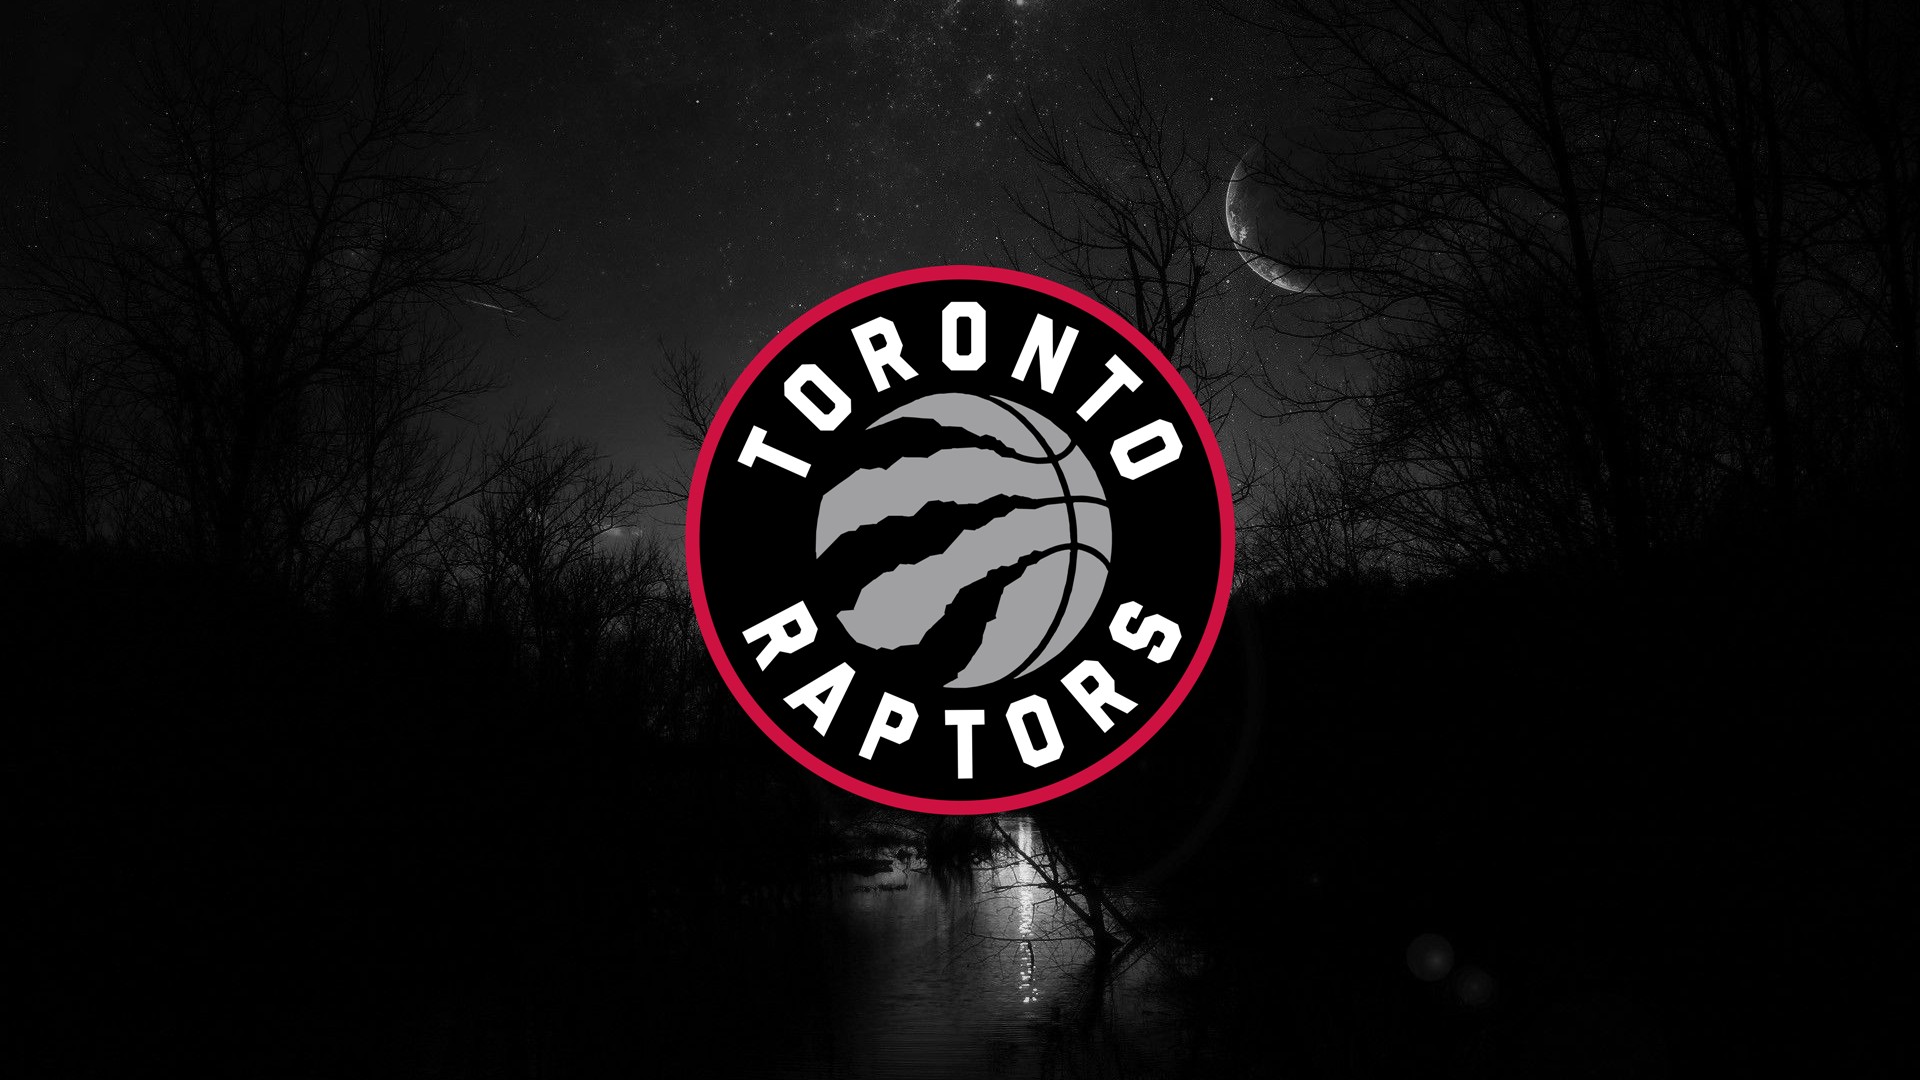 Backgrounds Raptors Basketball HD with image dimensions 1920x1080 pixel. You can make this wallpaper for your Desktop Computer Backgrounds, Windows or Mac Screensavers, iPhone Lock screen, Tablet or Android and another Mobile Phone device